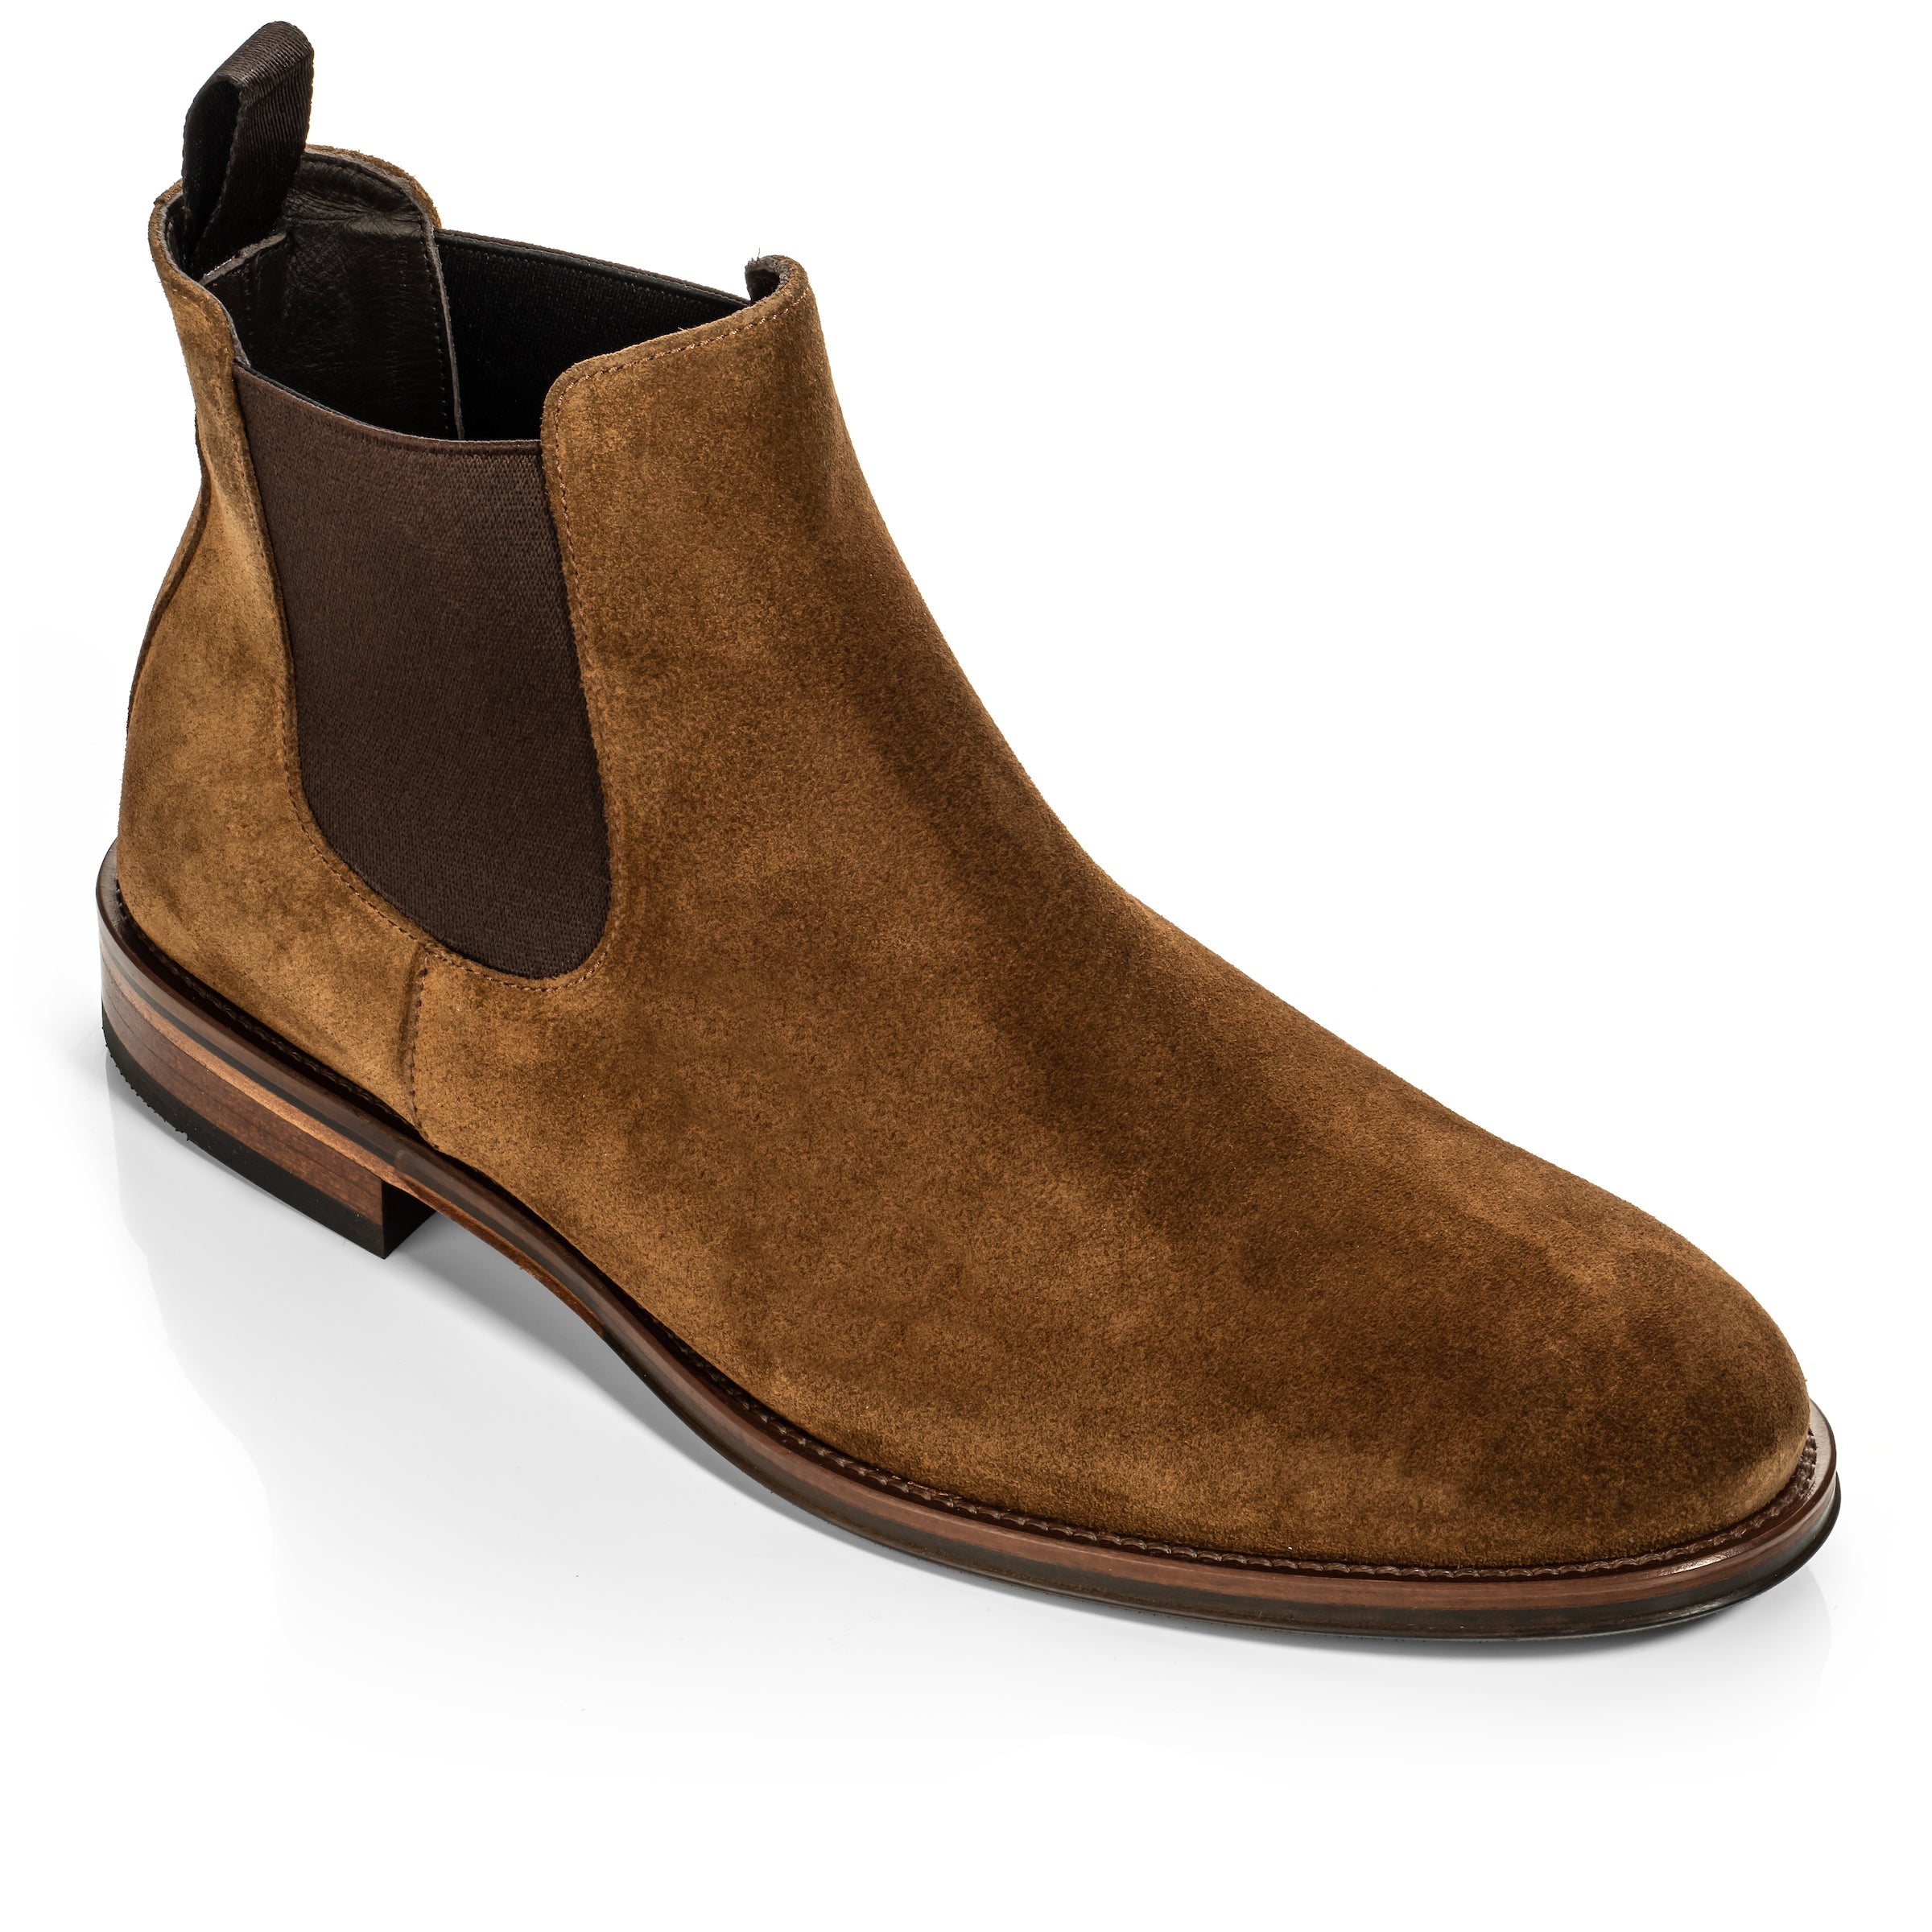 Shelby II Mid Brown Suede Chelsea Boot